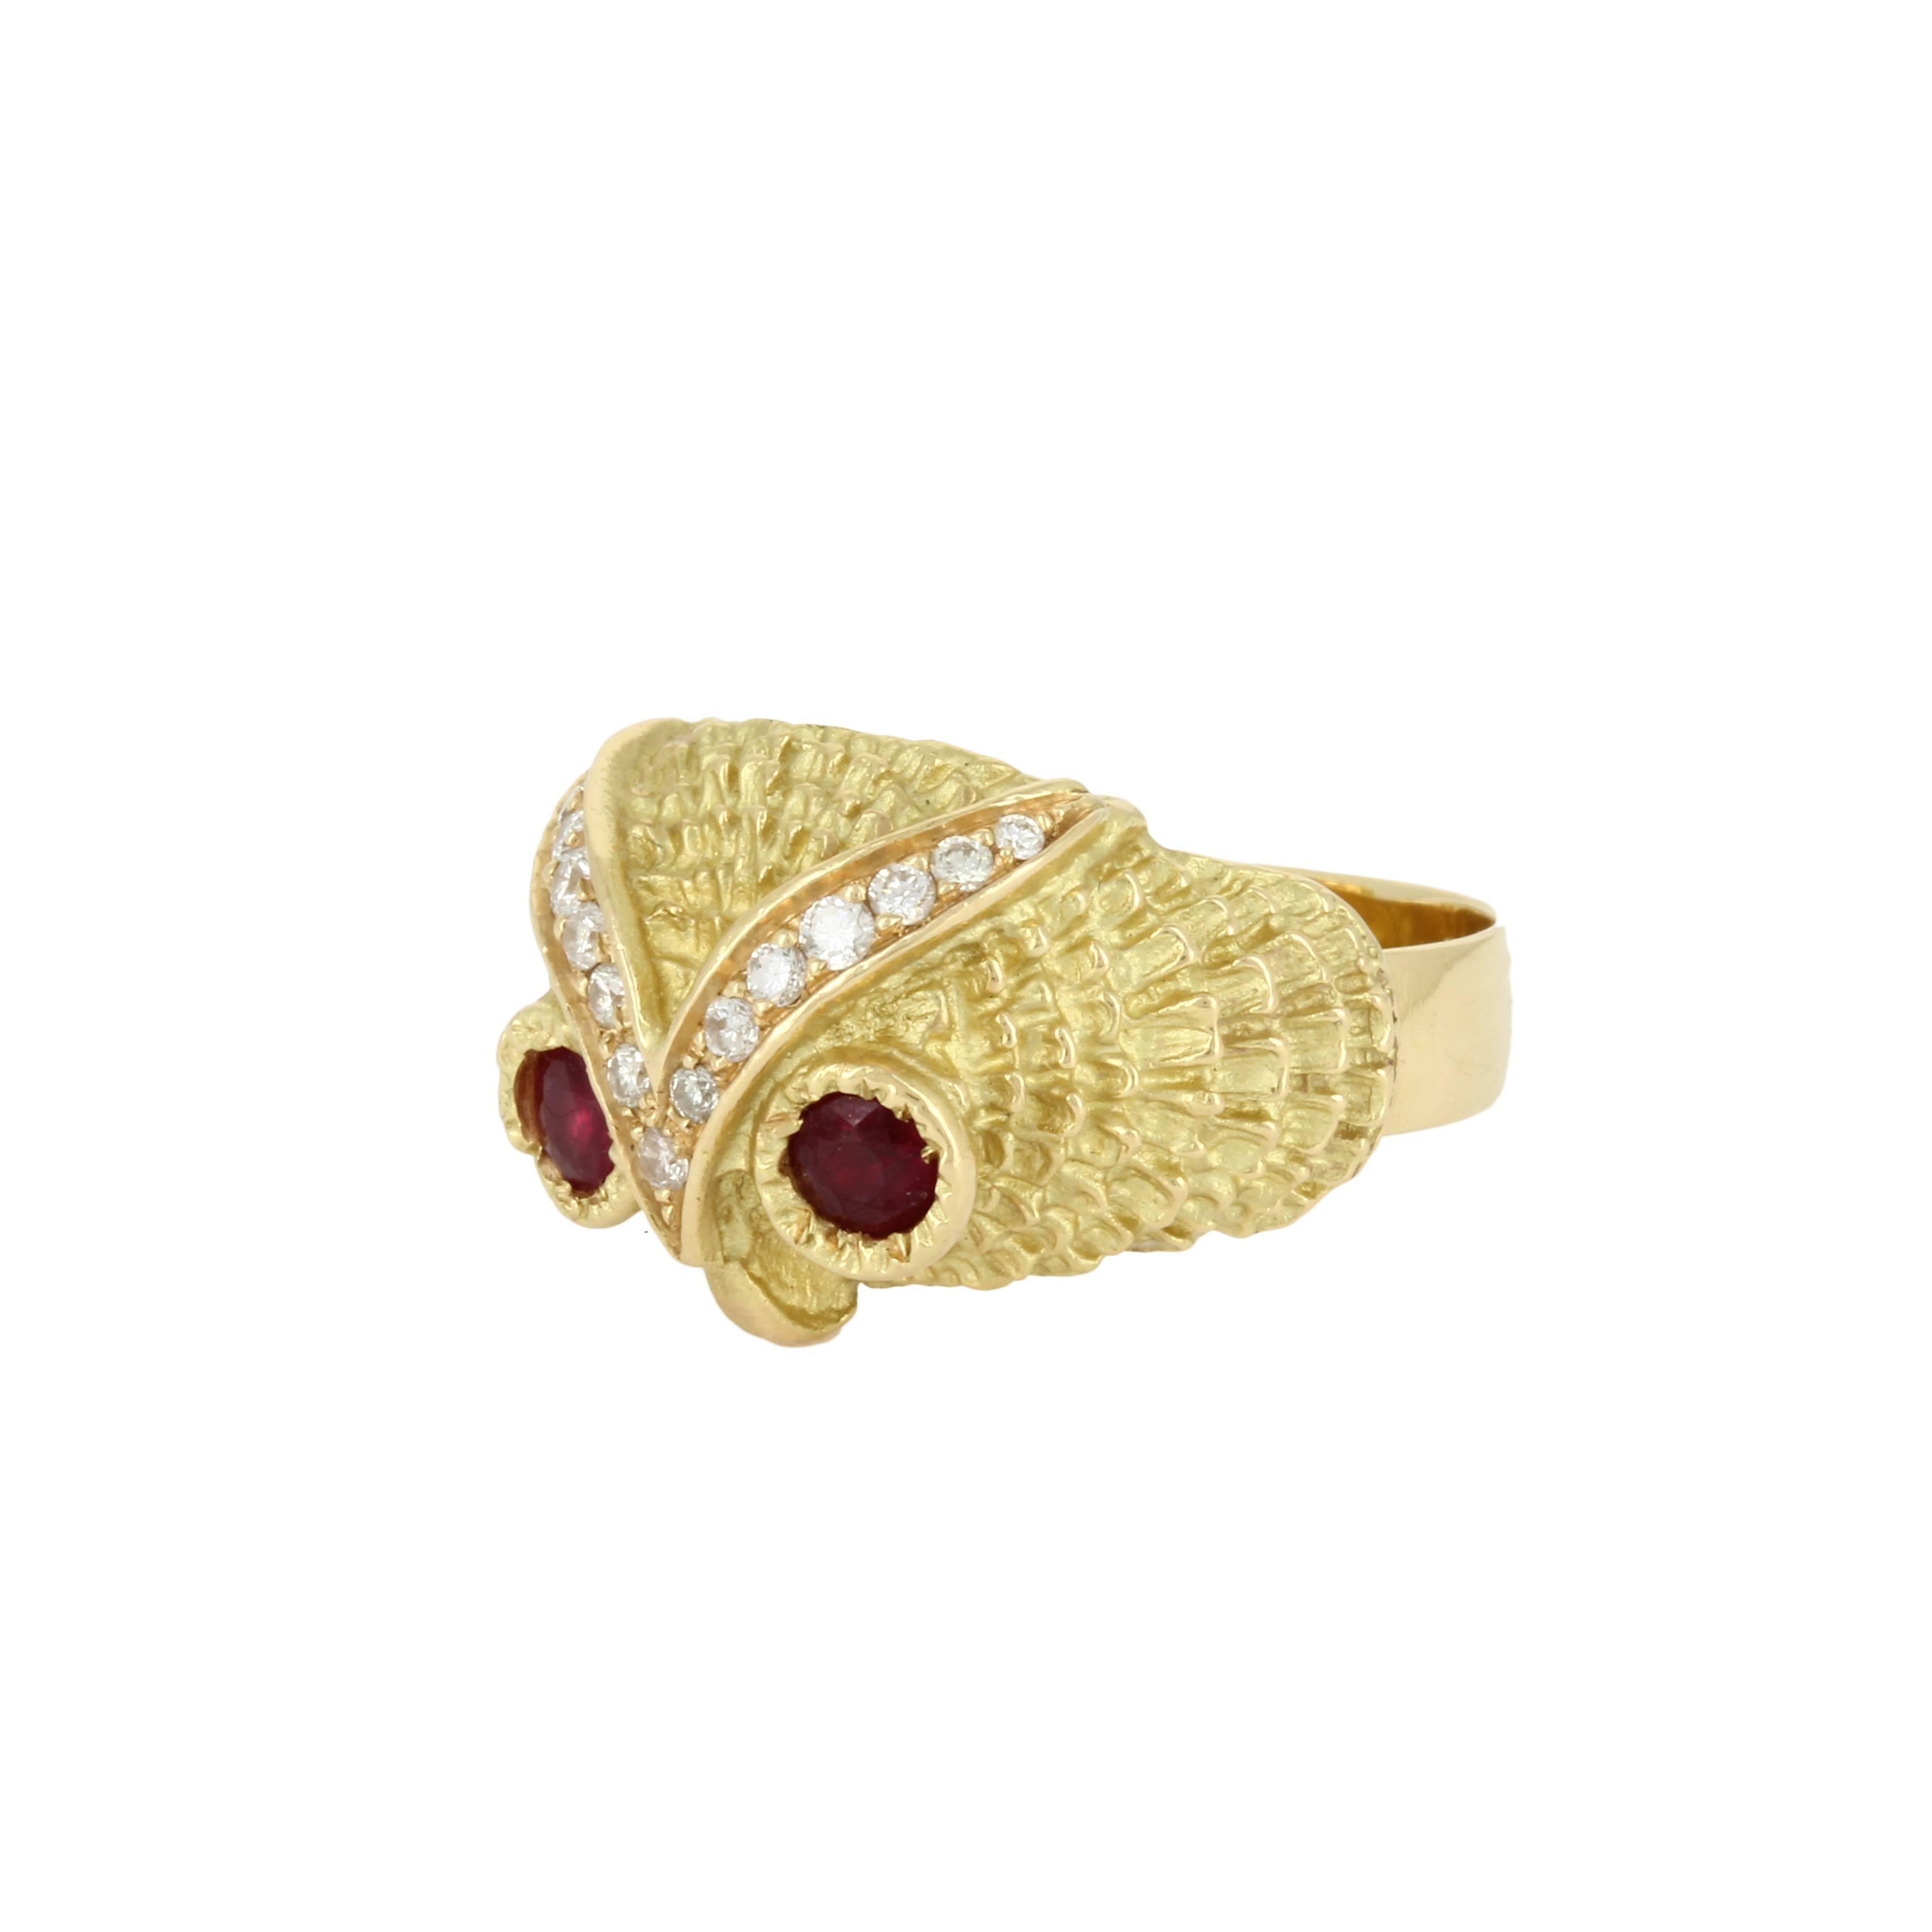 Ring in 18K gold 12 grammes
Diamonds 0,30 carats 
Ruby 0,40 carats 
size 53
Possibility to put at your size 
